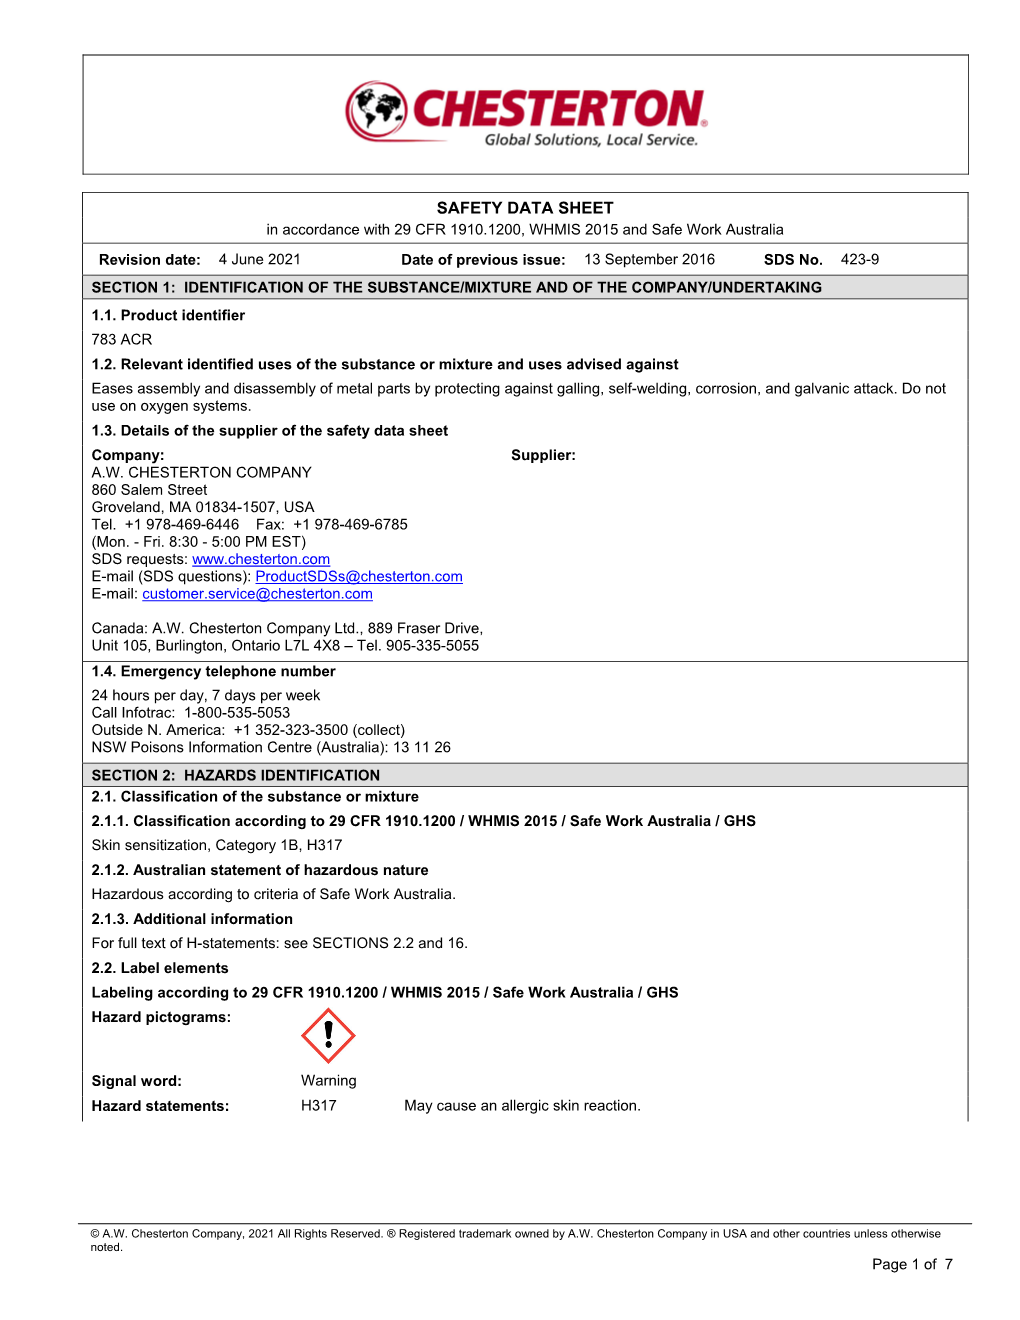 SAFETY DATA SHEET in Accordance with 29 CFR 1910.1200, WHMIS 2015 and Safe Work Australia